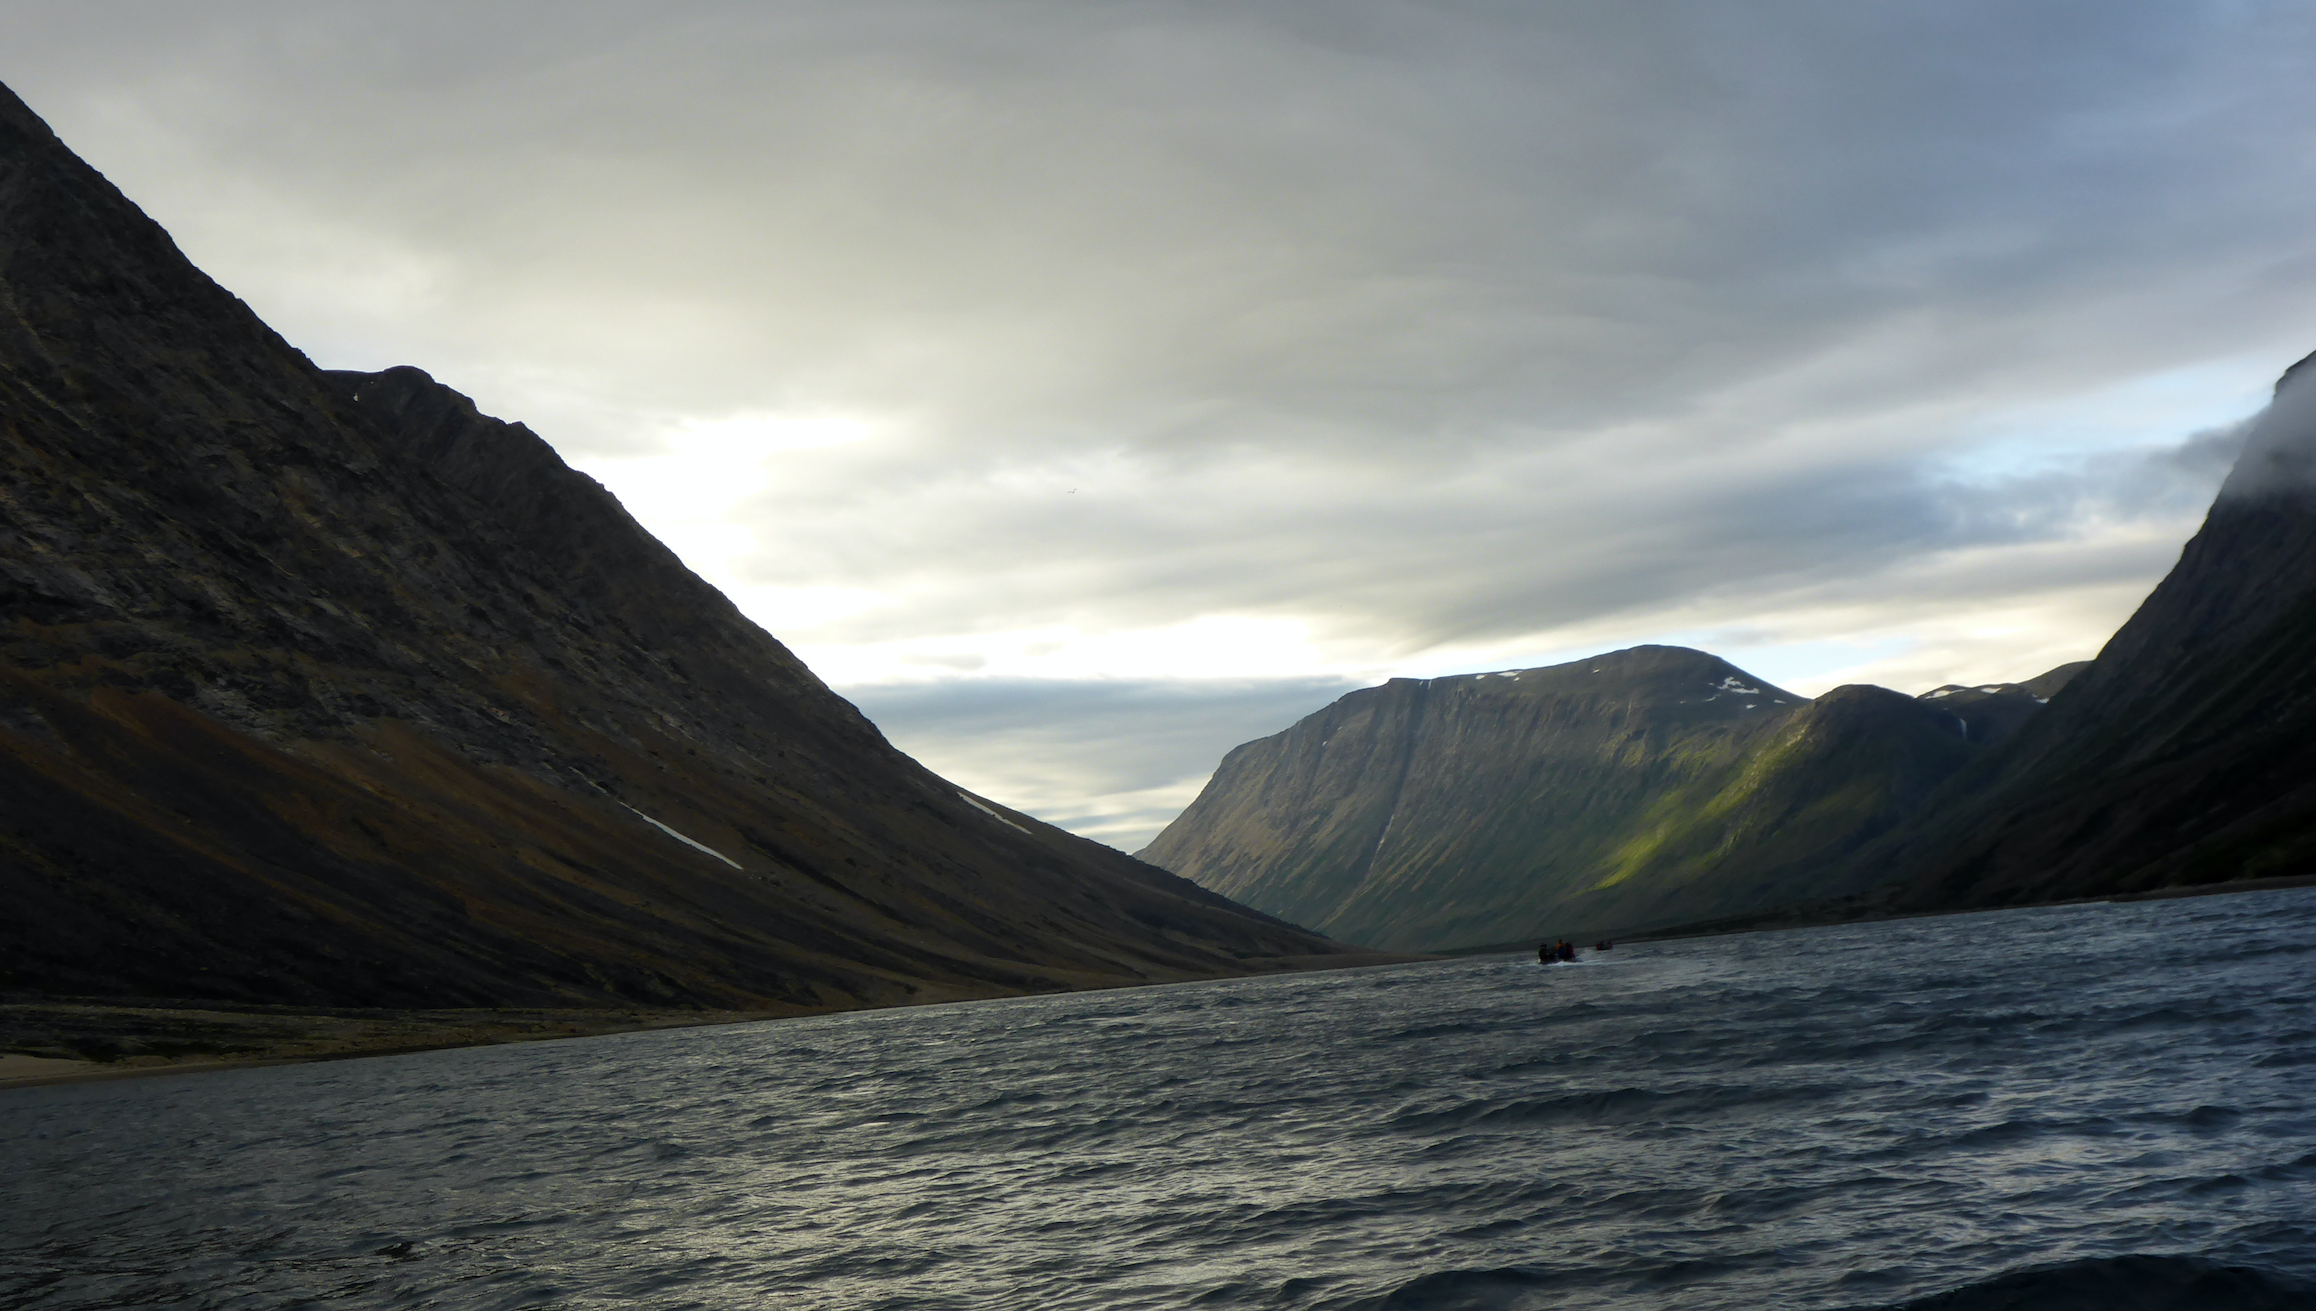 View of Torngat Mountains behind a large body of water